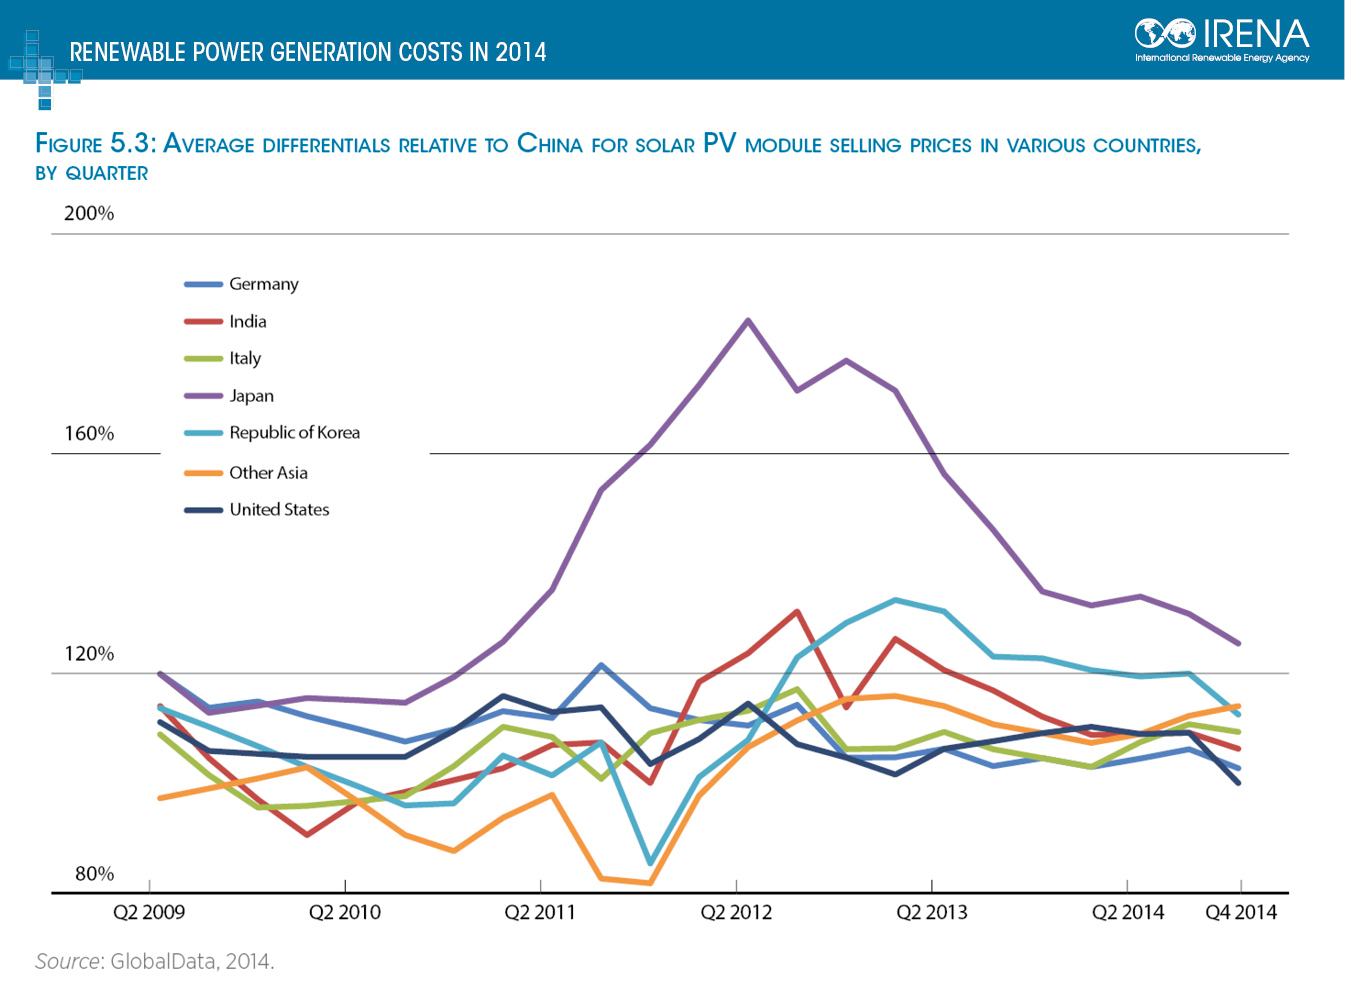 Electricity Price History Chart